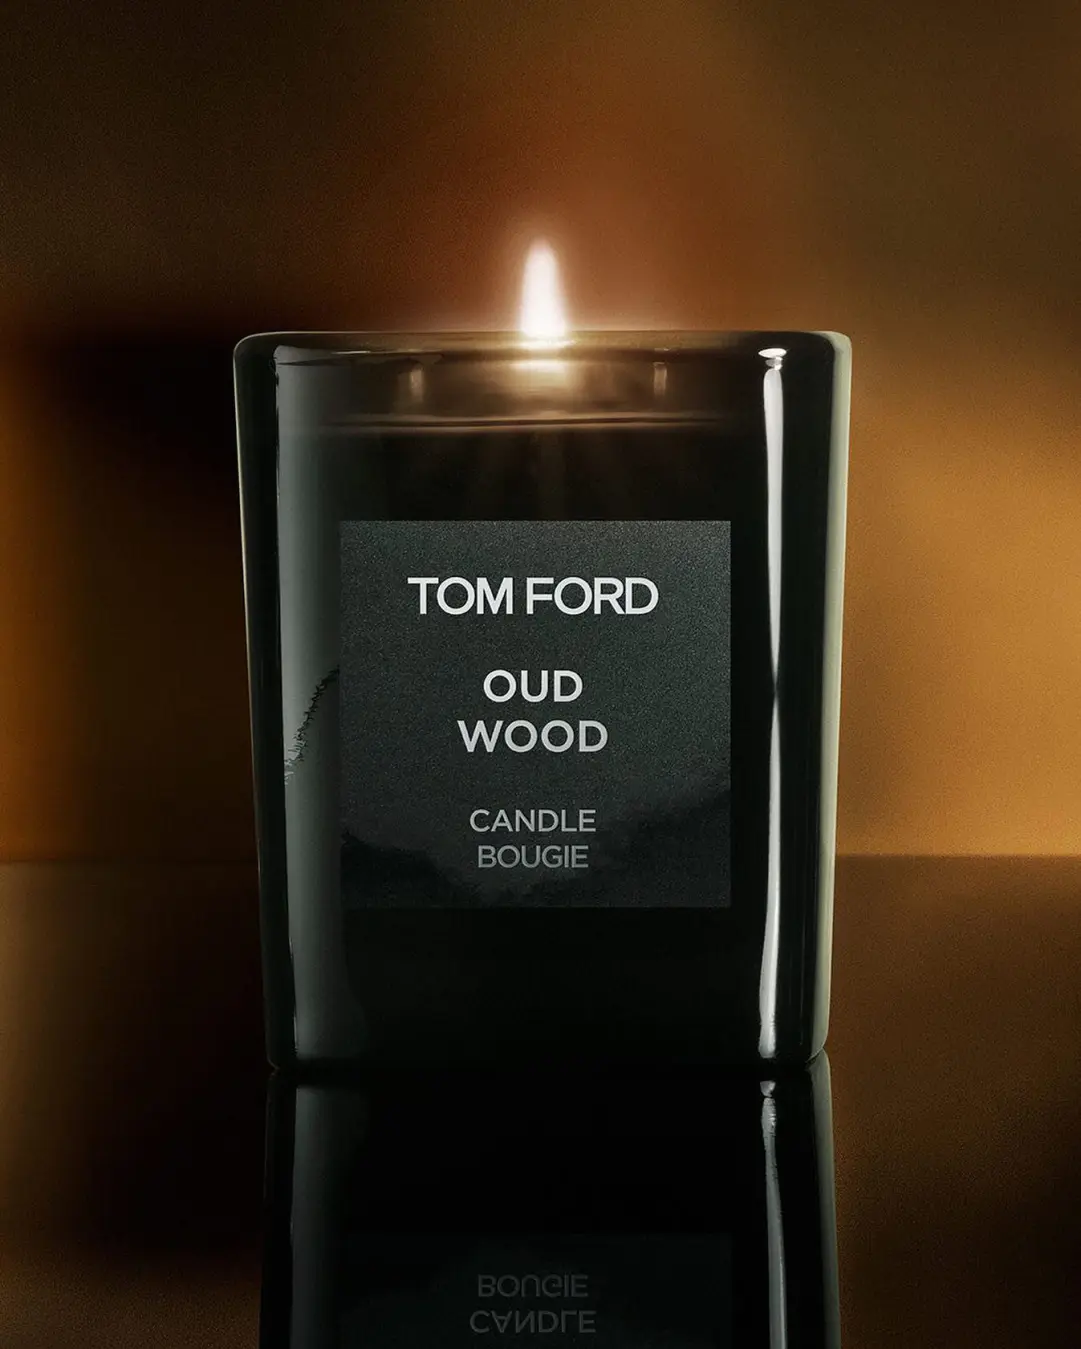 OUD WOOD CANDLE - TOM FORD